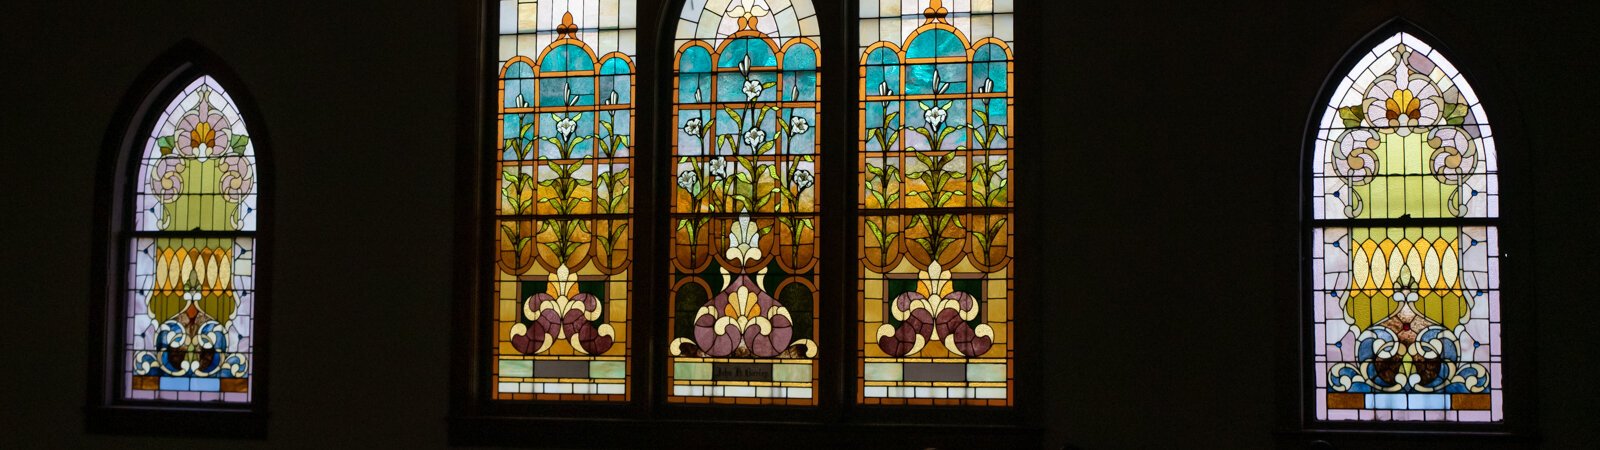 Stained glass windows of the Sanctuary, a historic church-turned-Airbnb near downtown Wabash.